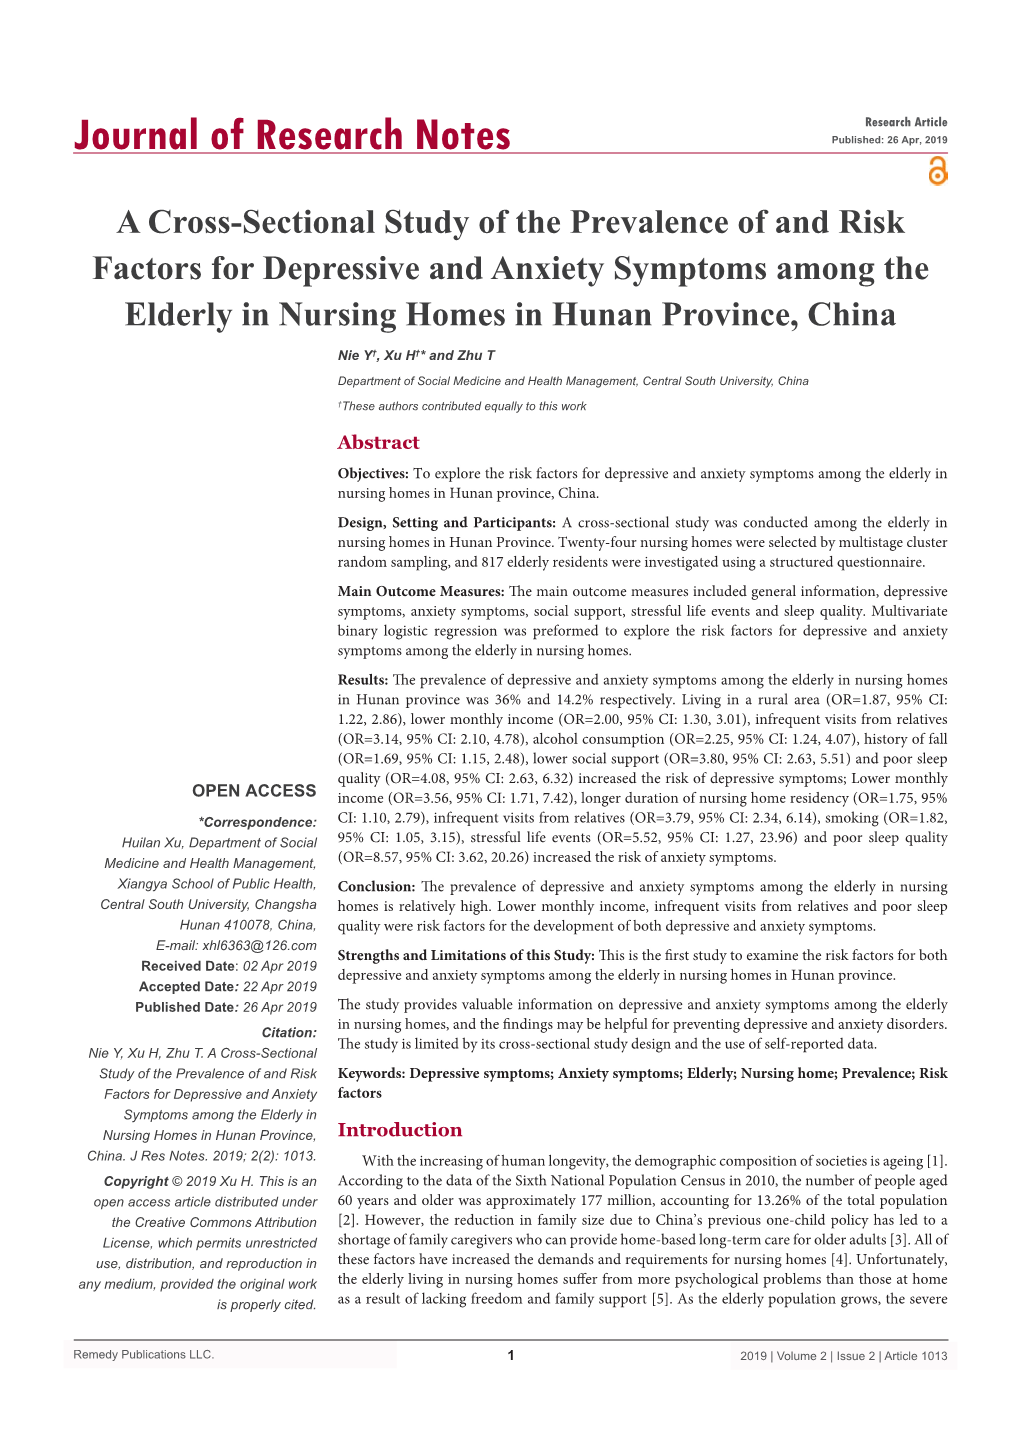 A Cross-Sectional Study of the Prevalence of and Risk Factors for Depressive and Anxiety Symptoms Among the Elderly in Nursing Homes in Hunan Province, China